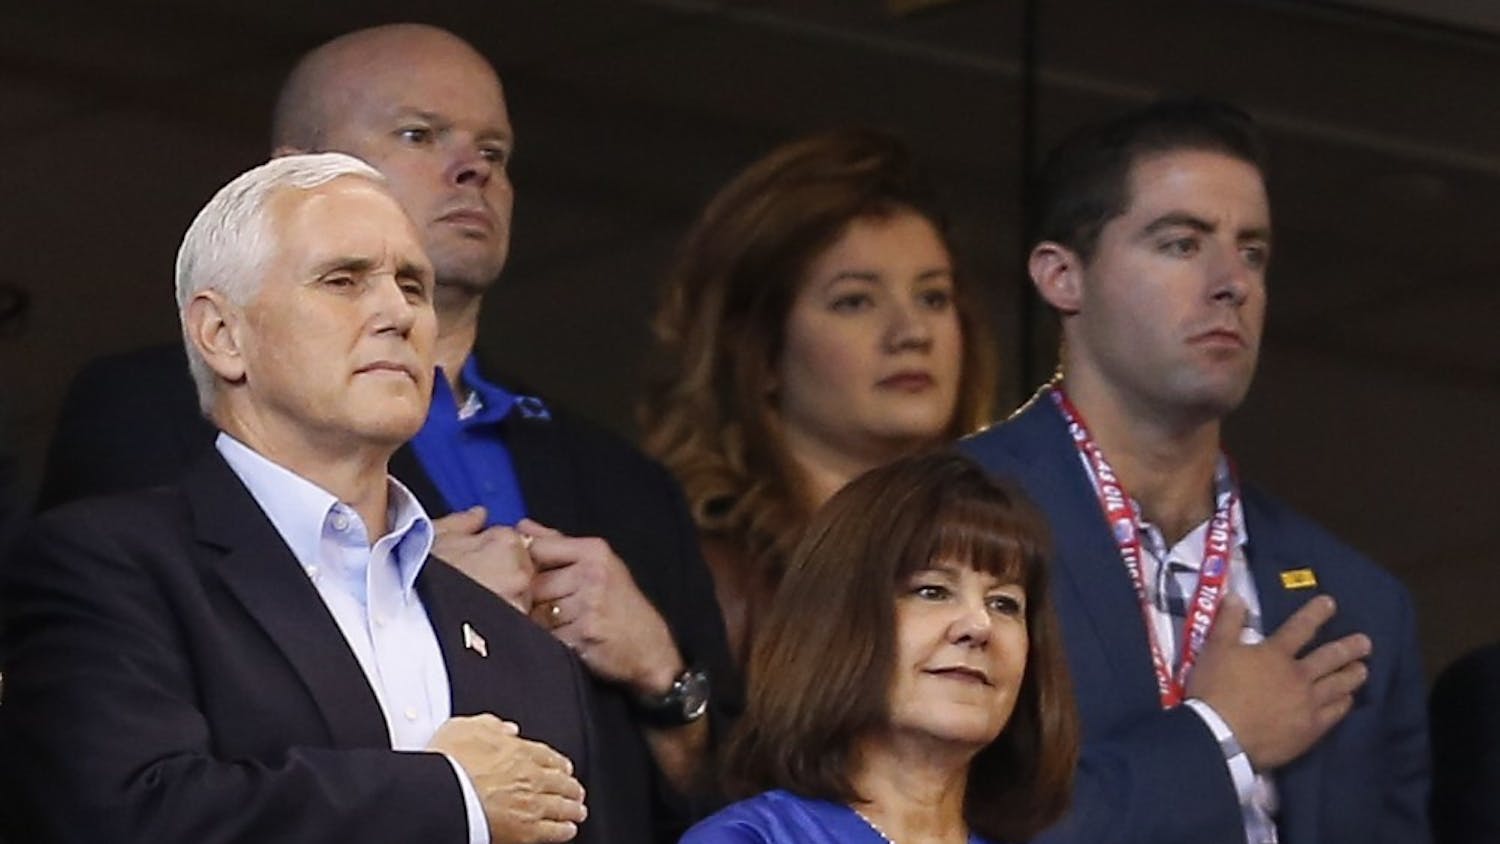 Vice President Mike Pence covers his heart along with his wife, Karen, right, during the national anthem as the Indianapolis Colts play host the San Francisco 49ers at Lucas Oil Stadium on Sunday, Oct. 8, 2017, in Indianapolis. (Sam Riche/TNS)